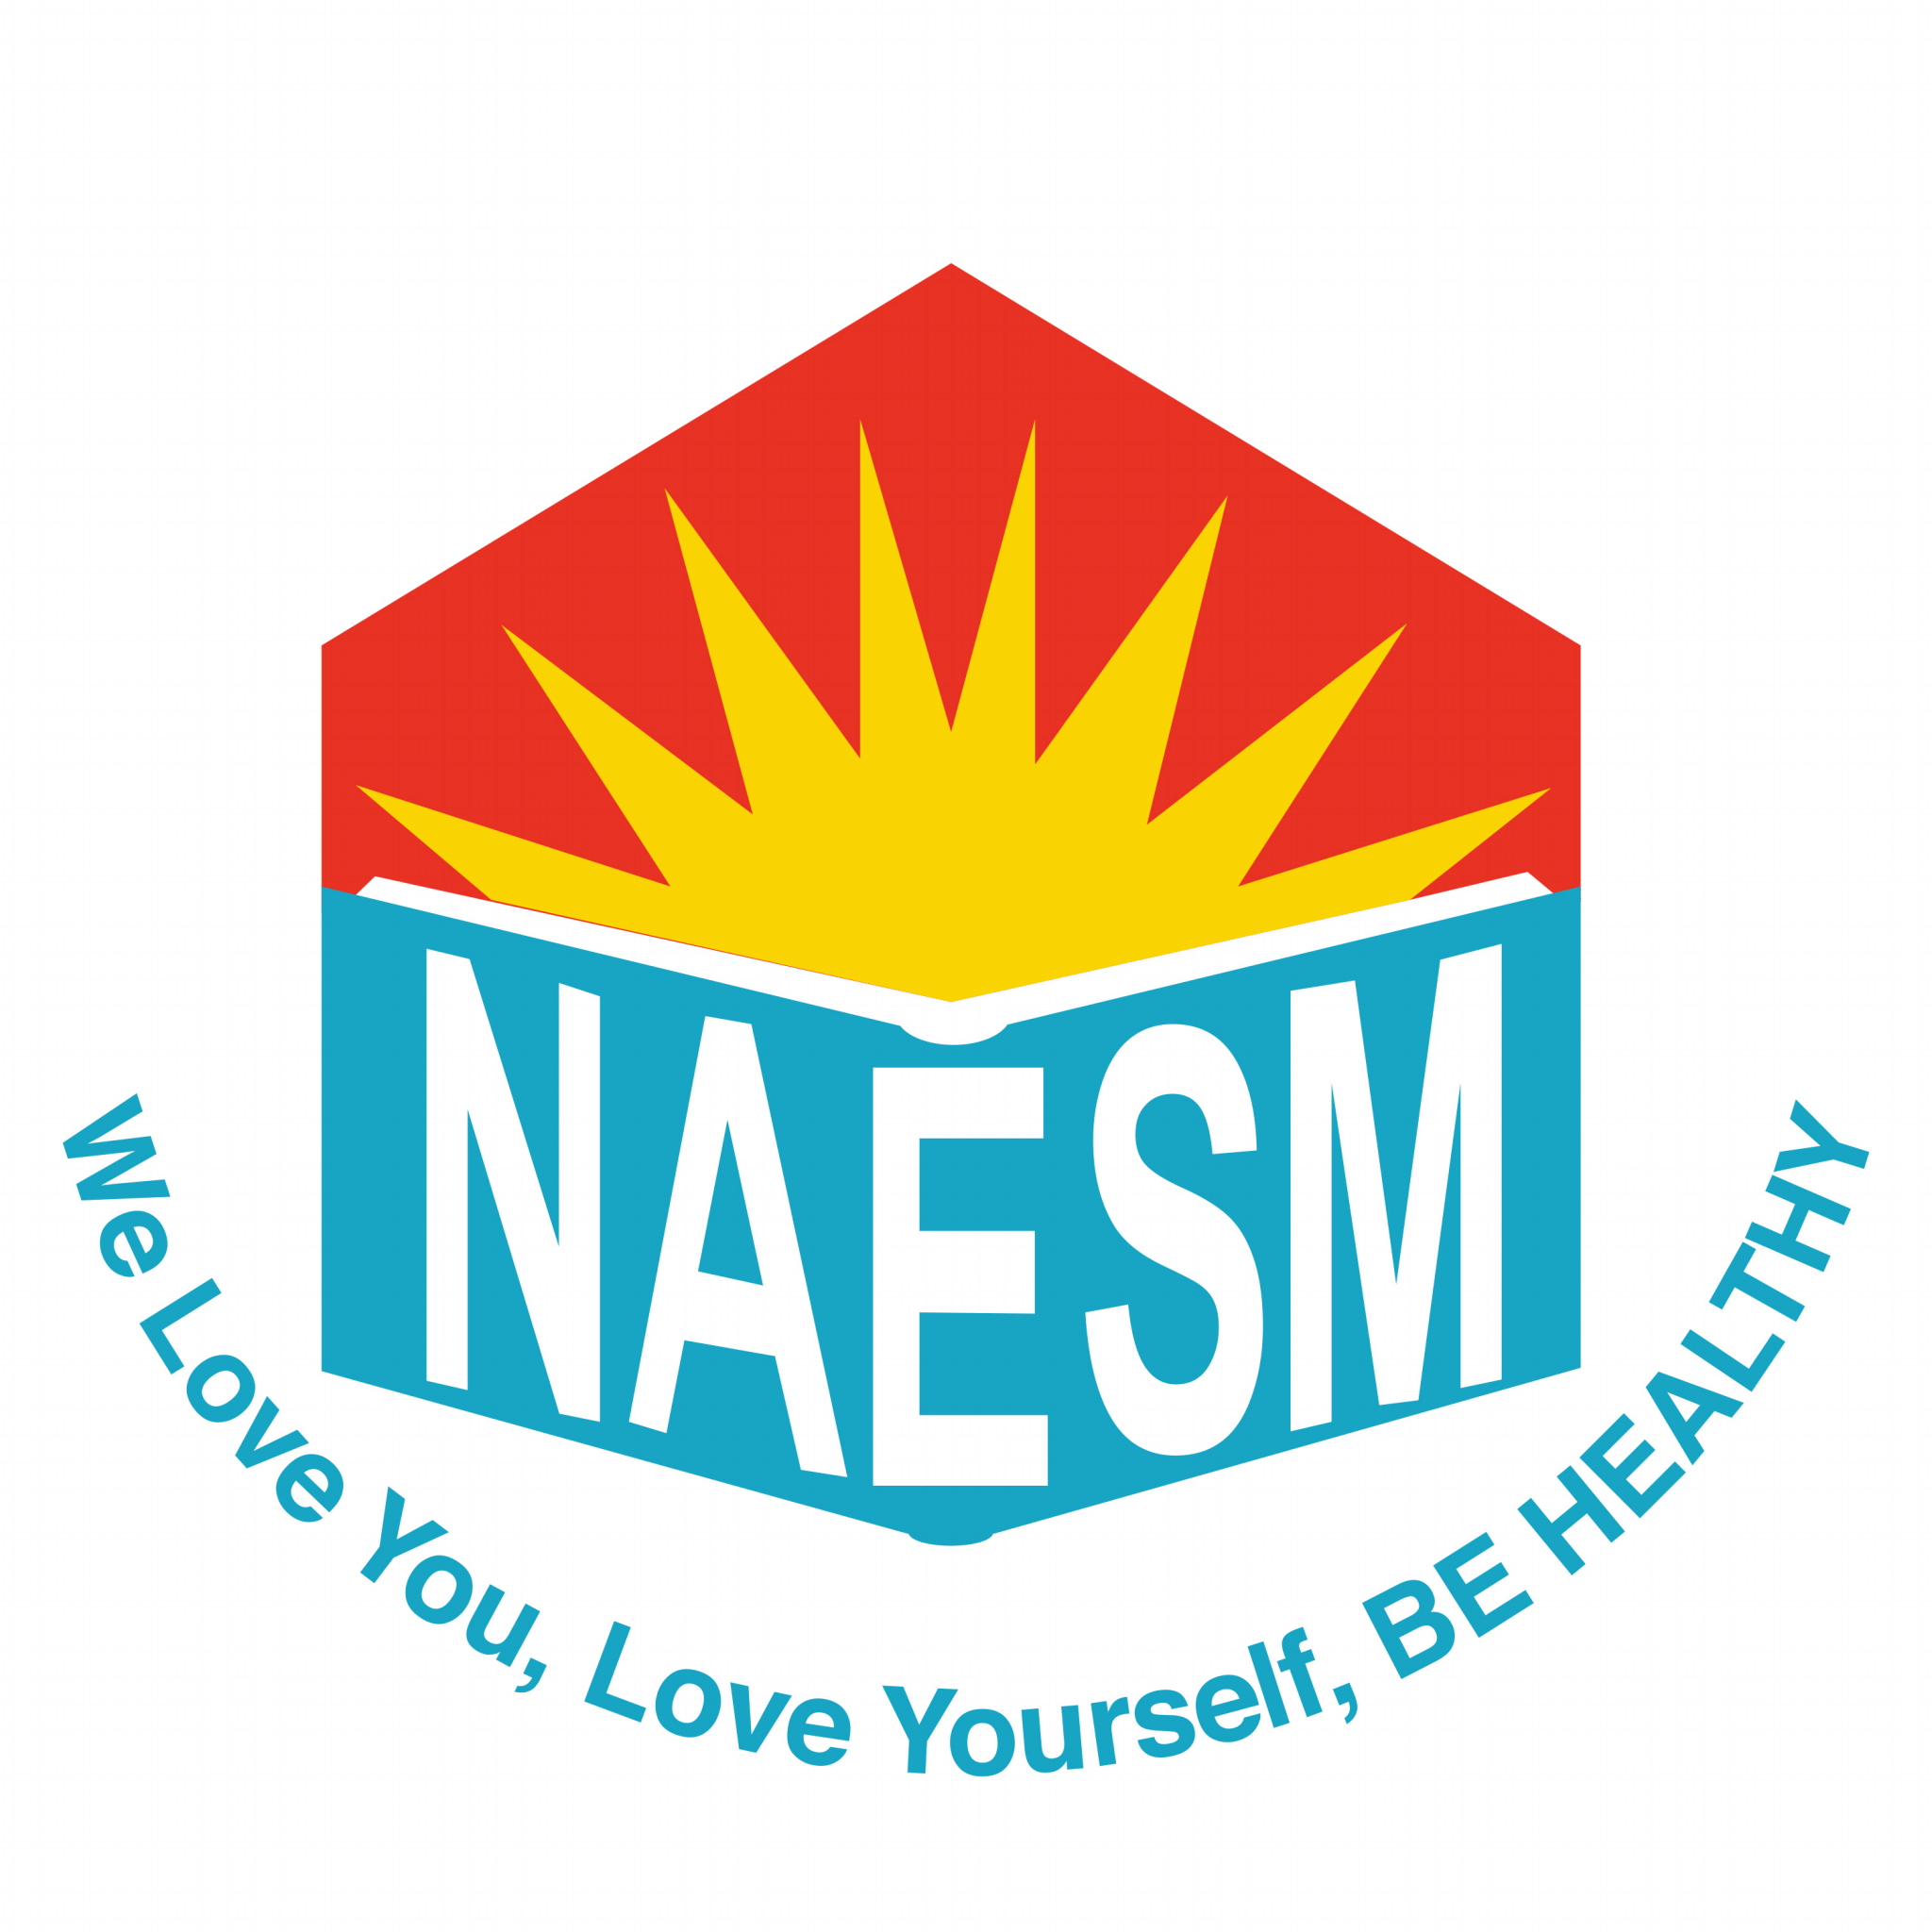 R_1ET1lPIHf3OOBTH_HIGH RESOLUTION NAESM LOGO (1).png